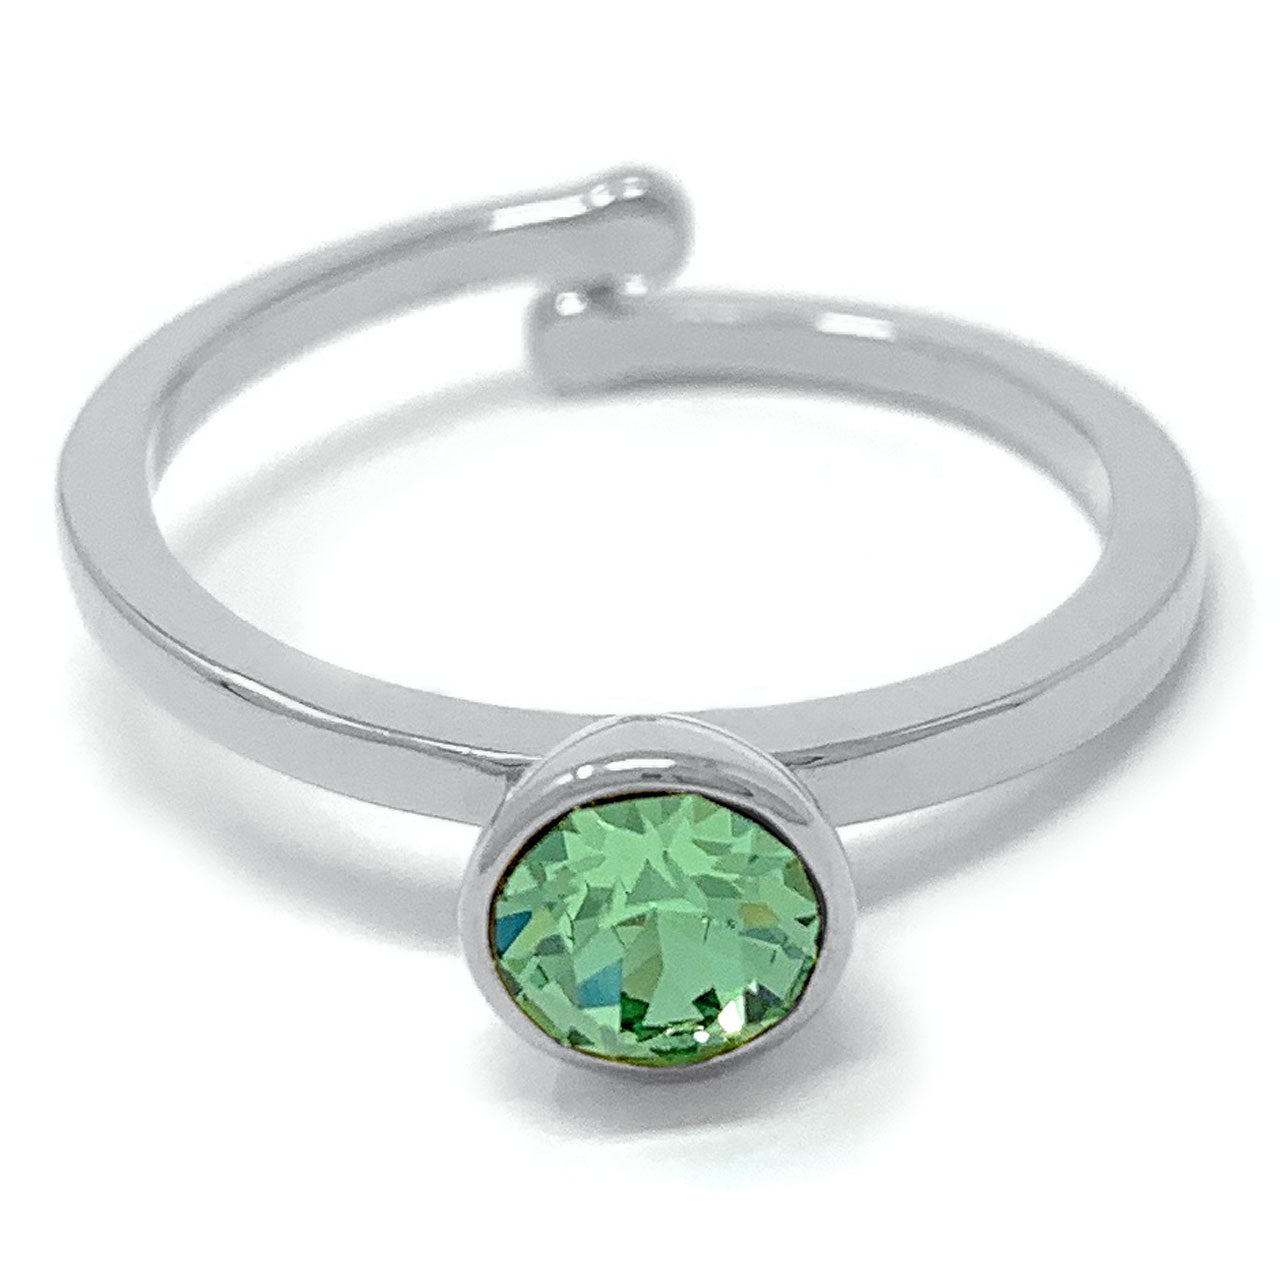 Harley Adjustable Ring with Green Peridot Round Crystals from Swarovski Silver Toned Rhodium Plated - Ed Heart